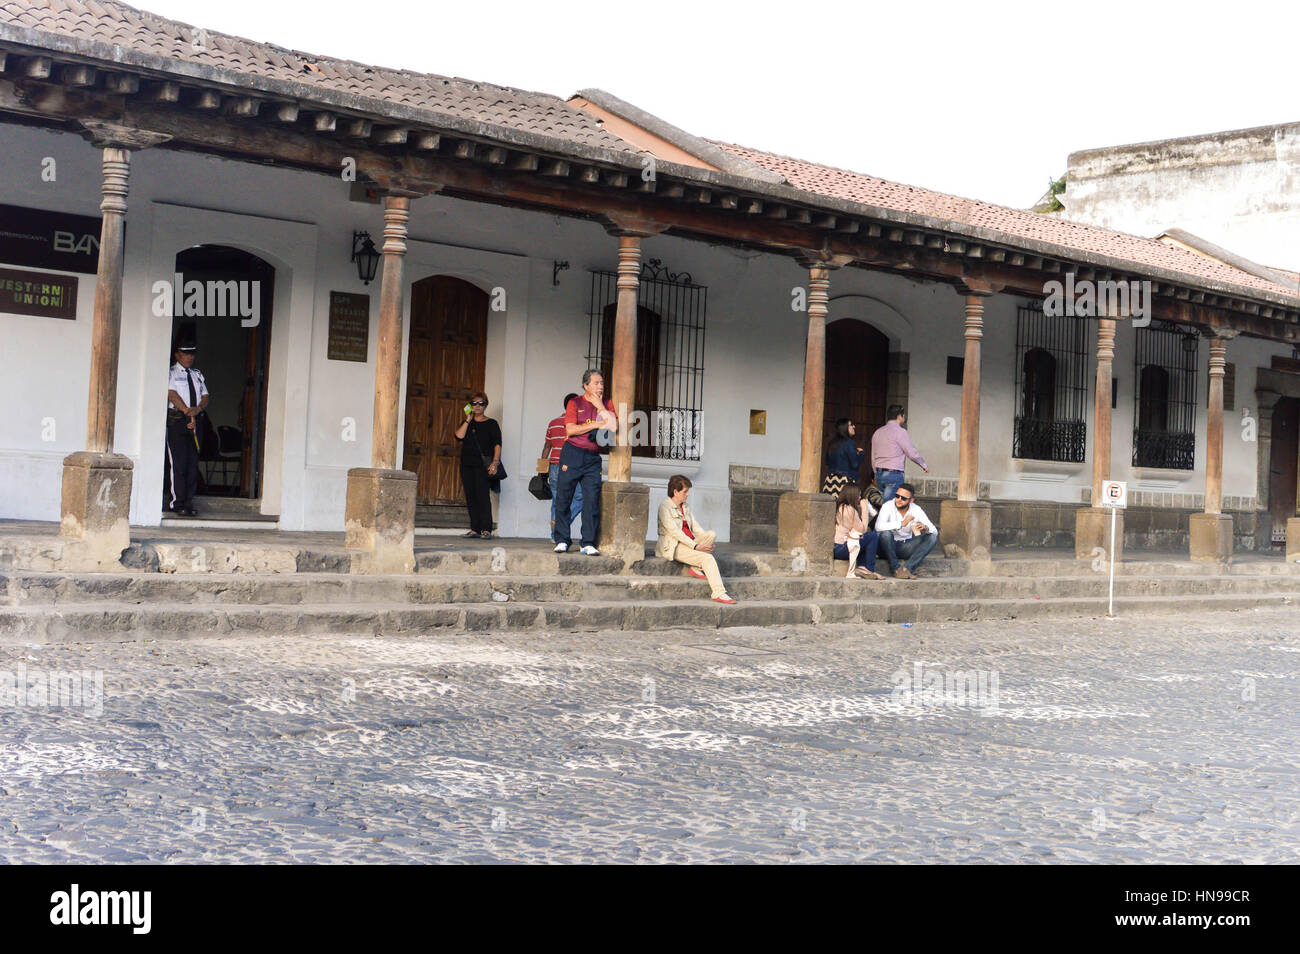 Antigua, Guatemala - February 15, 2015: Tourists and locals relax by one of the colonial buildings on the main plaza of Antigua, Guatemala Stock Photo